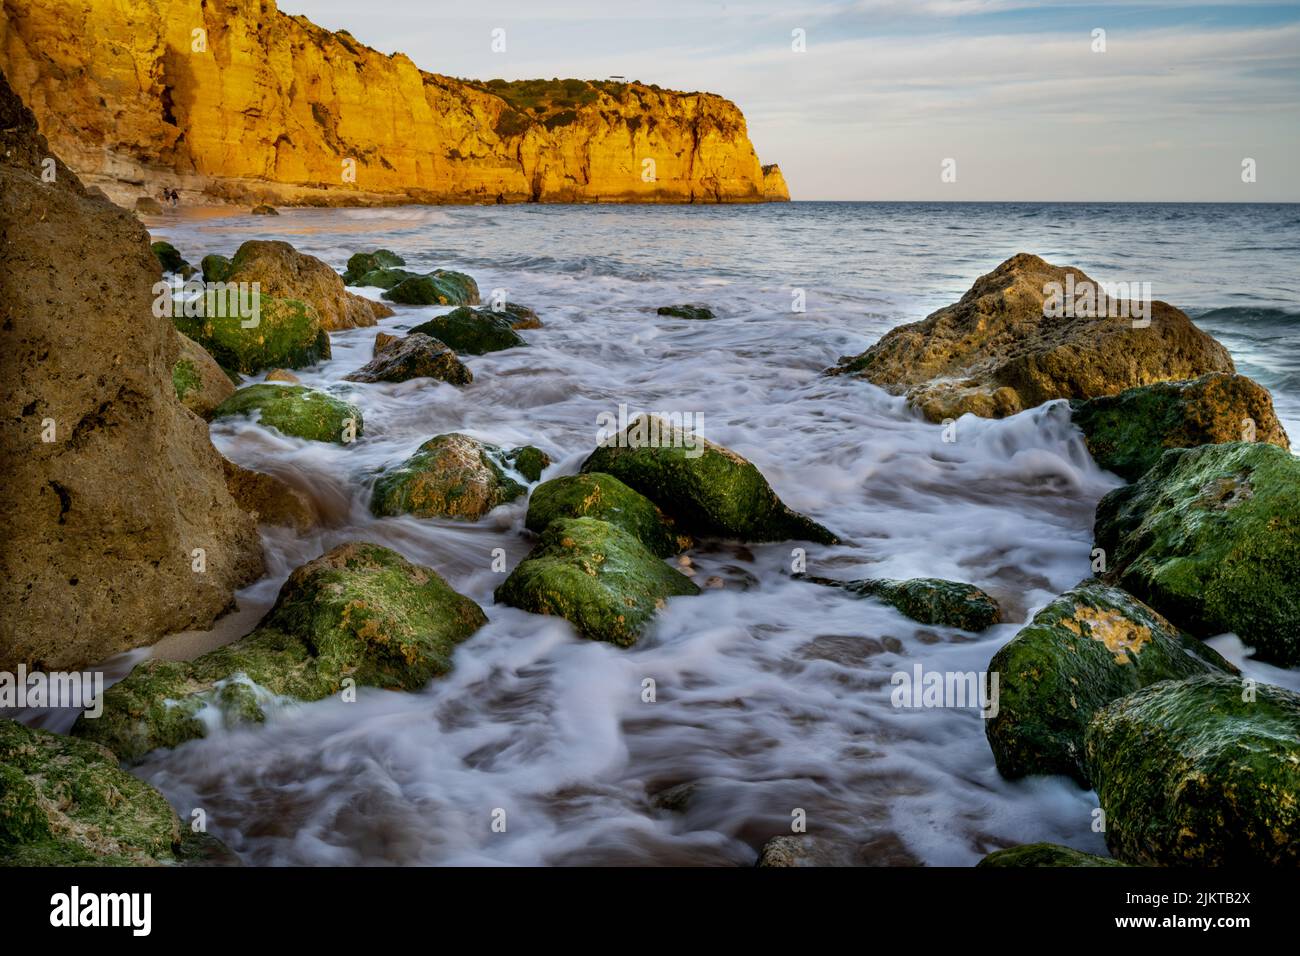 A Mossy stones on the seashore at cloudy orange sunset Stock Photo